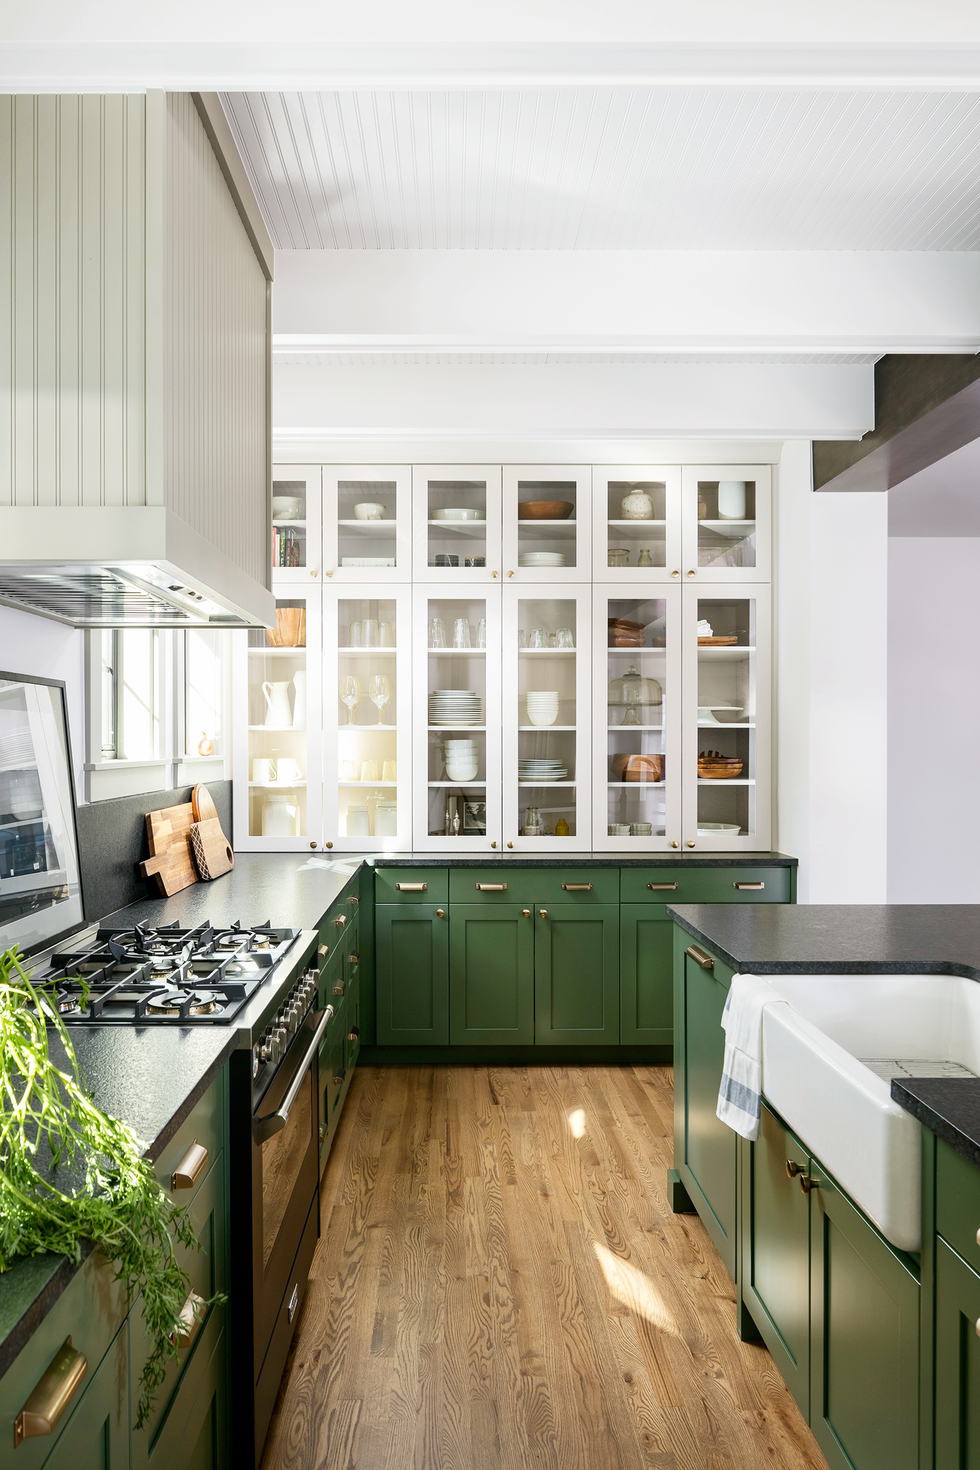 organized kitchen setup by design and build firm forge bow dwellings green lower cabinets, white upper cabinets, glass front cabinets, dishware in cabinets, clean, organized